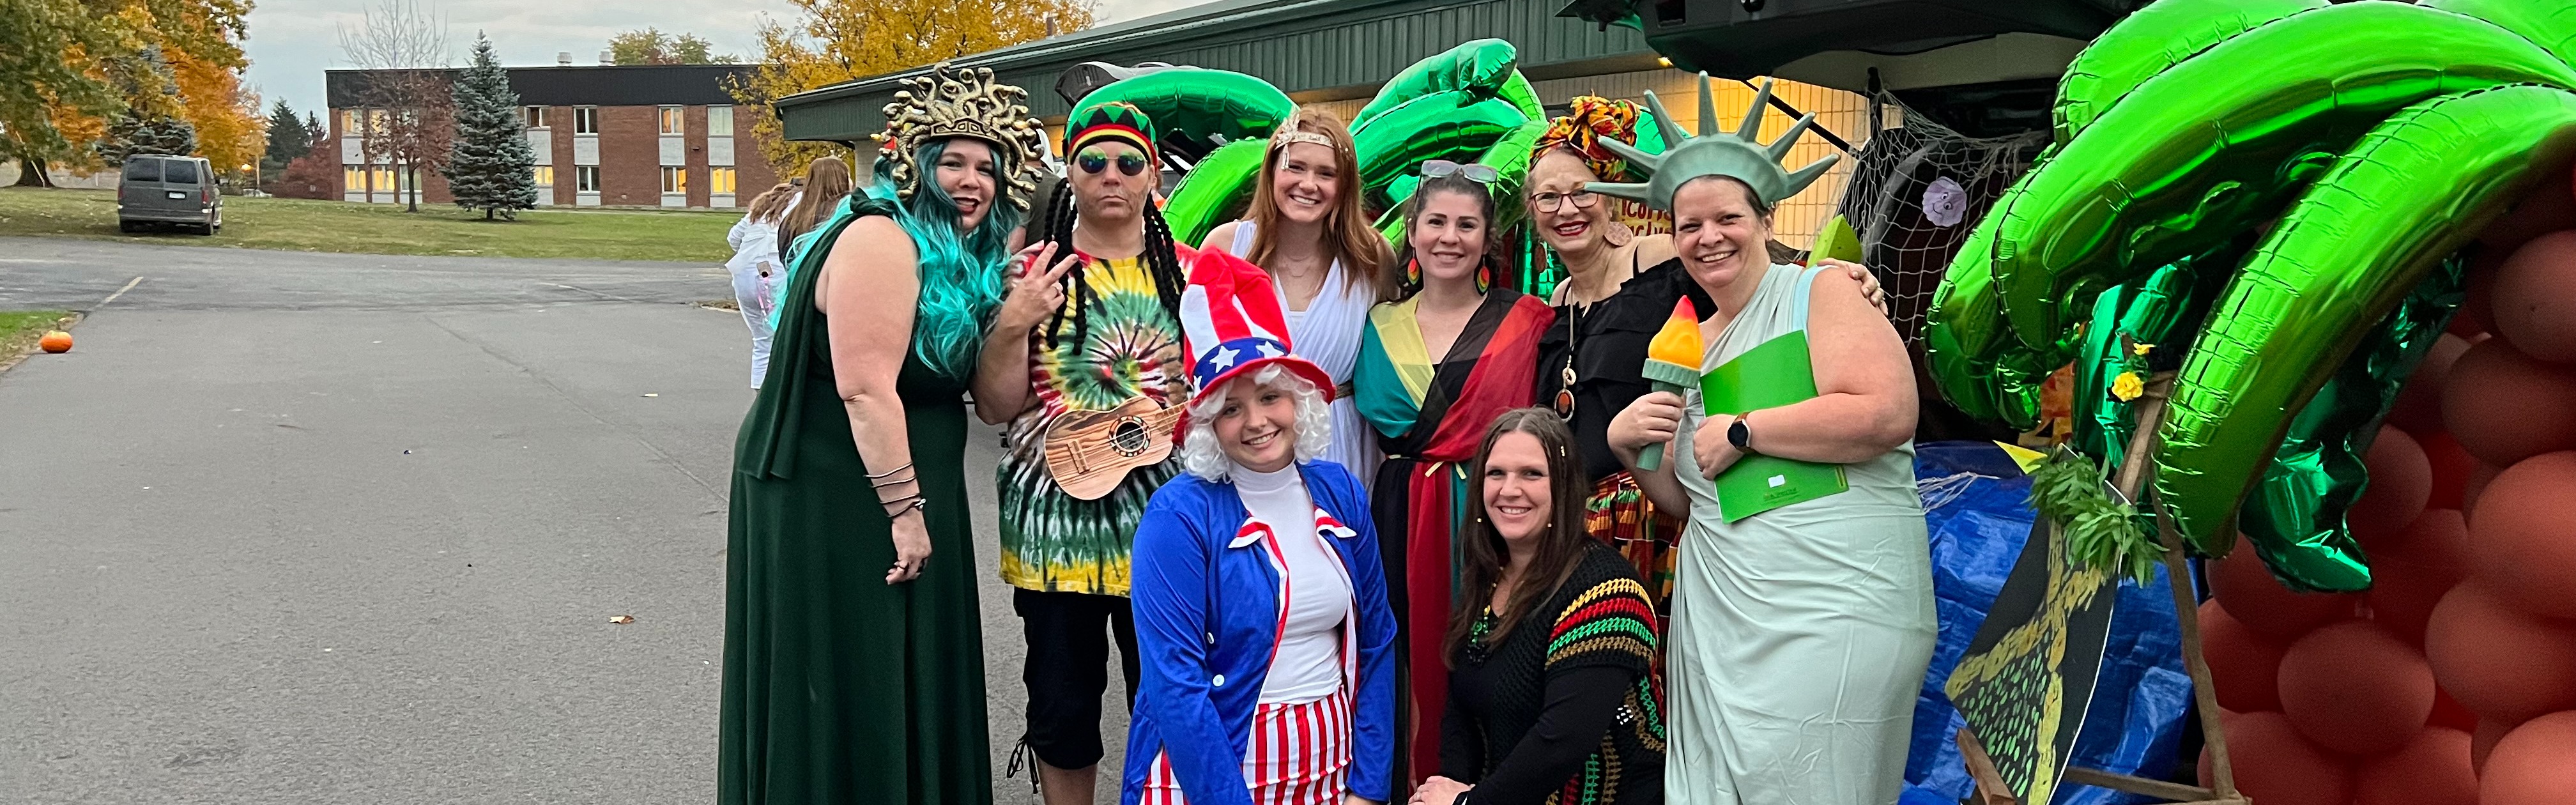 Staff in Costumes